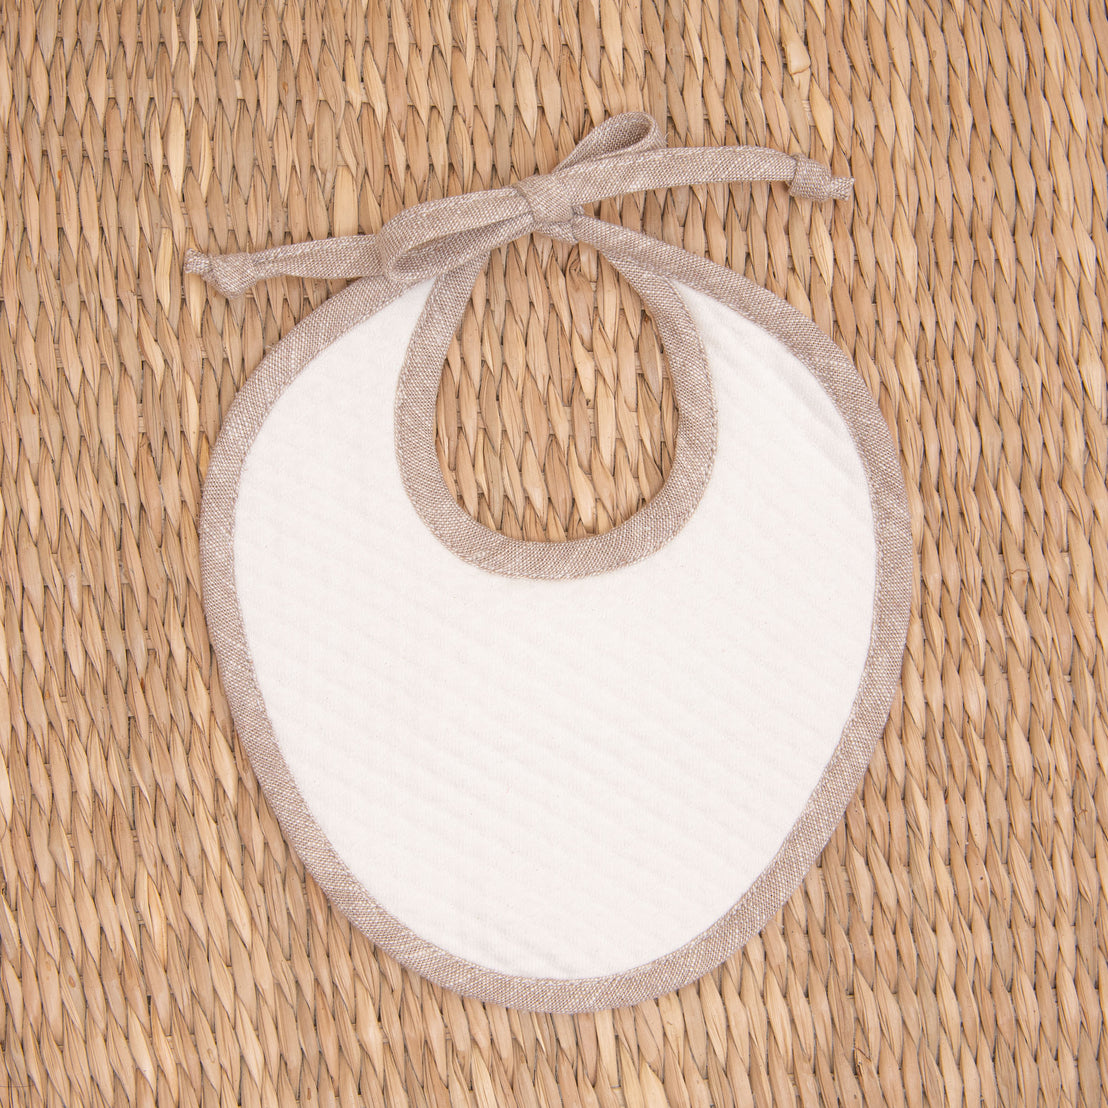 Flat lay photo of the tan Silas Linen Trim Bib. The bib is made from textured cotton in light ivory